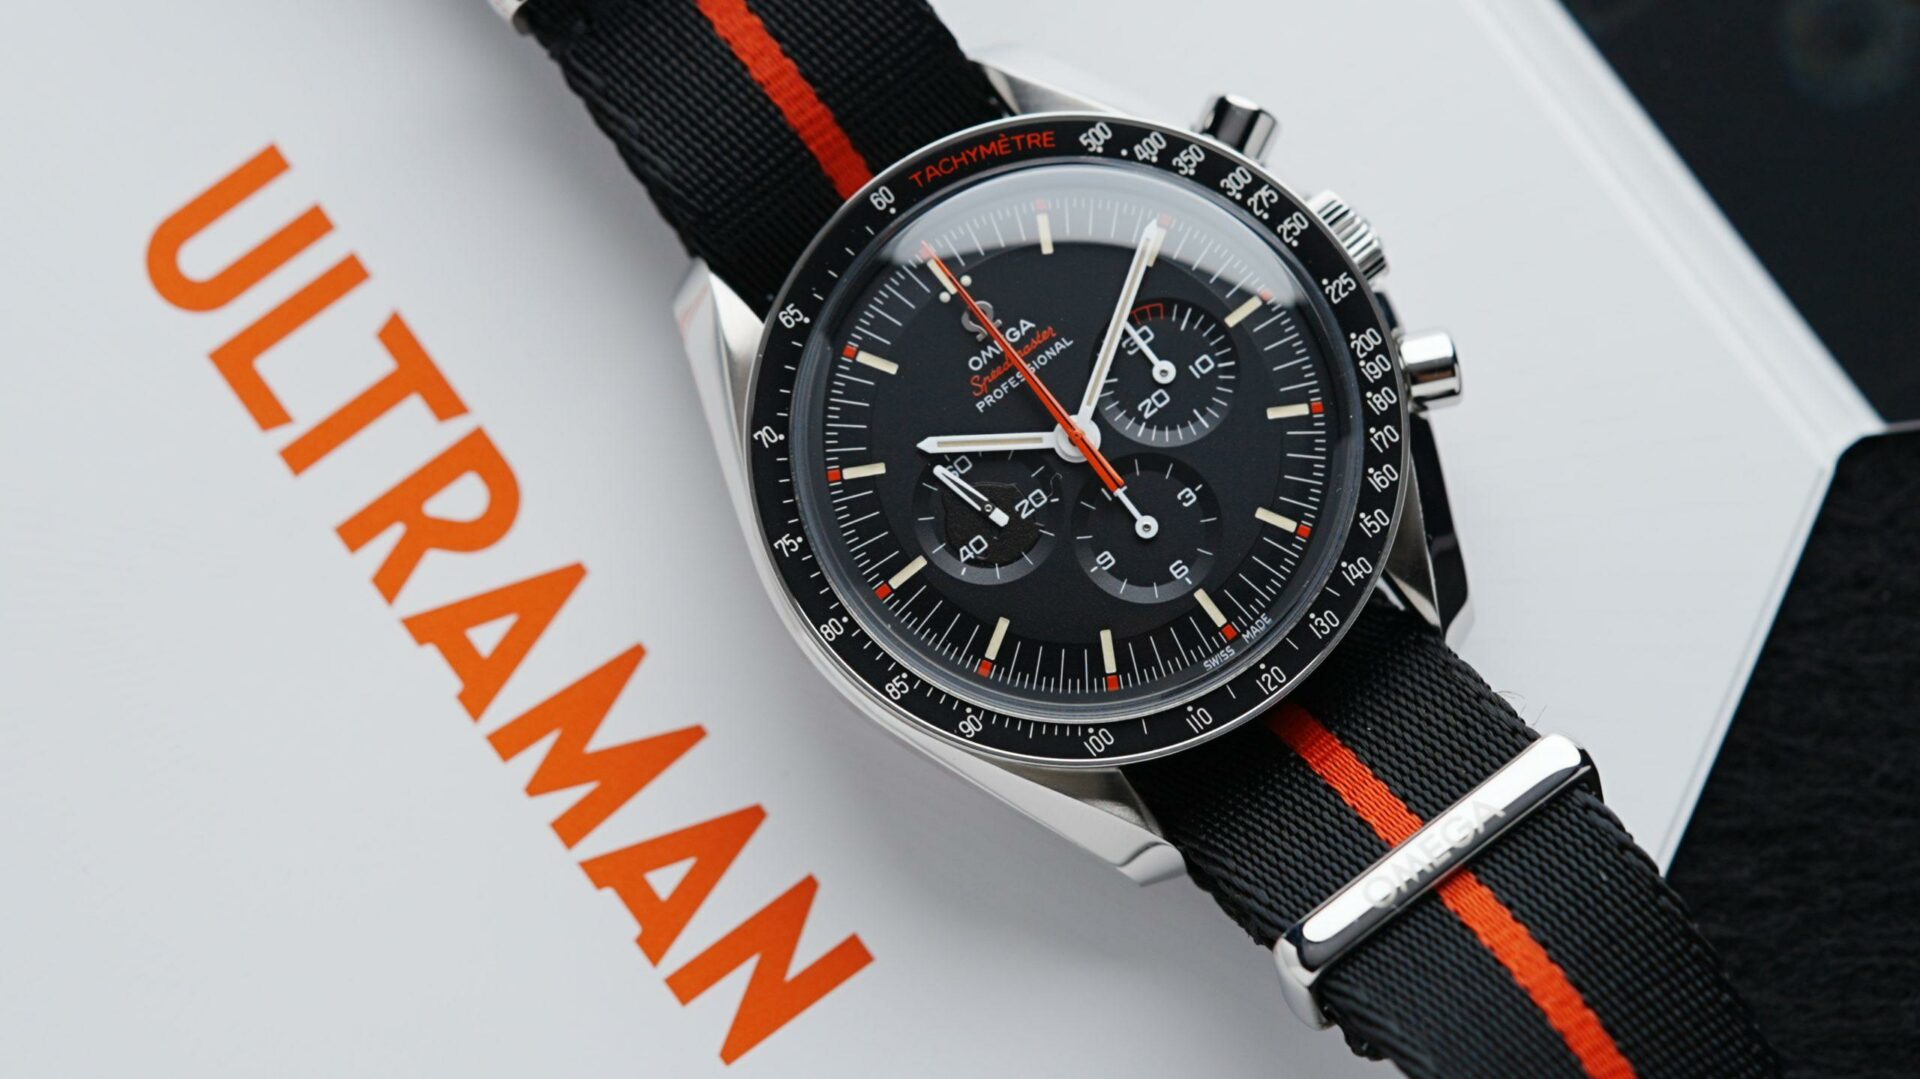 Omega Speedy Tuesday Ultraman watch featured on white background with orange text reading "Ultraman".